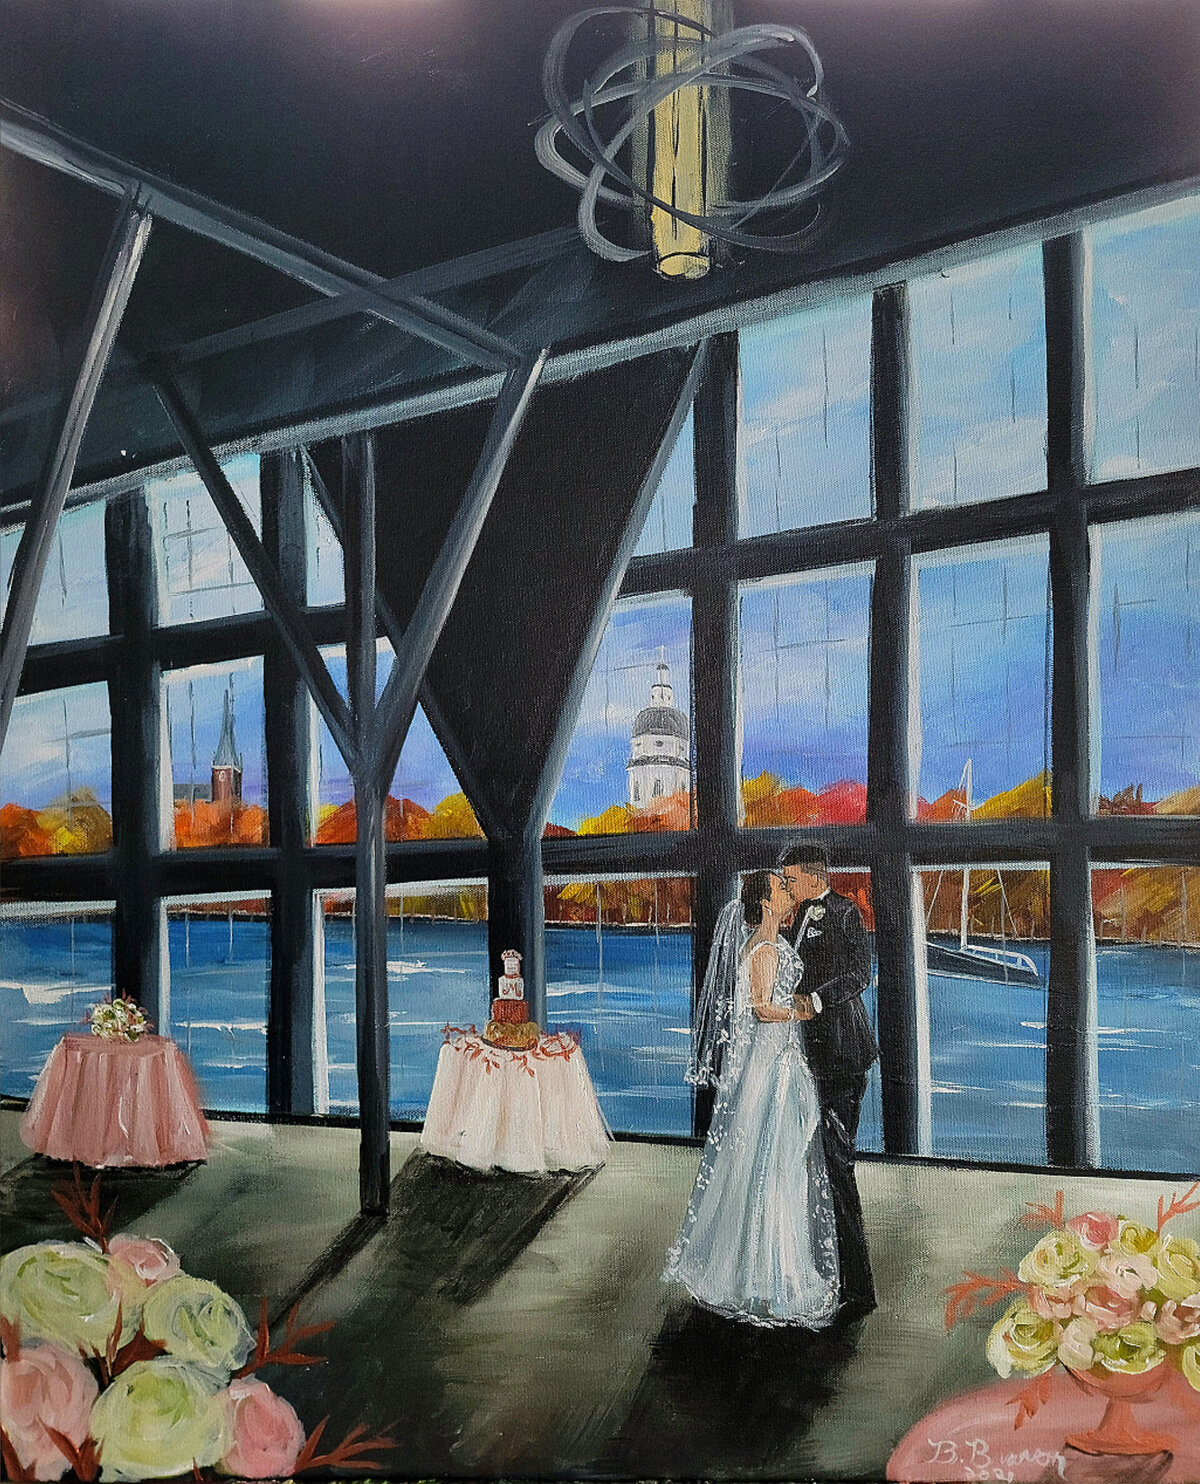 Fall live wedding painting in Annapolis, Maryland. Couple shares a kiss on the dance floor with Annapolis in the background.